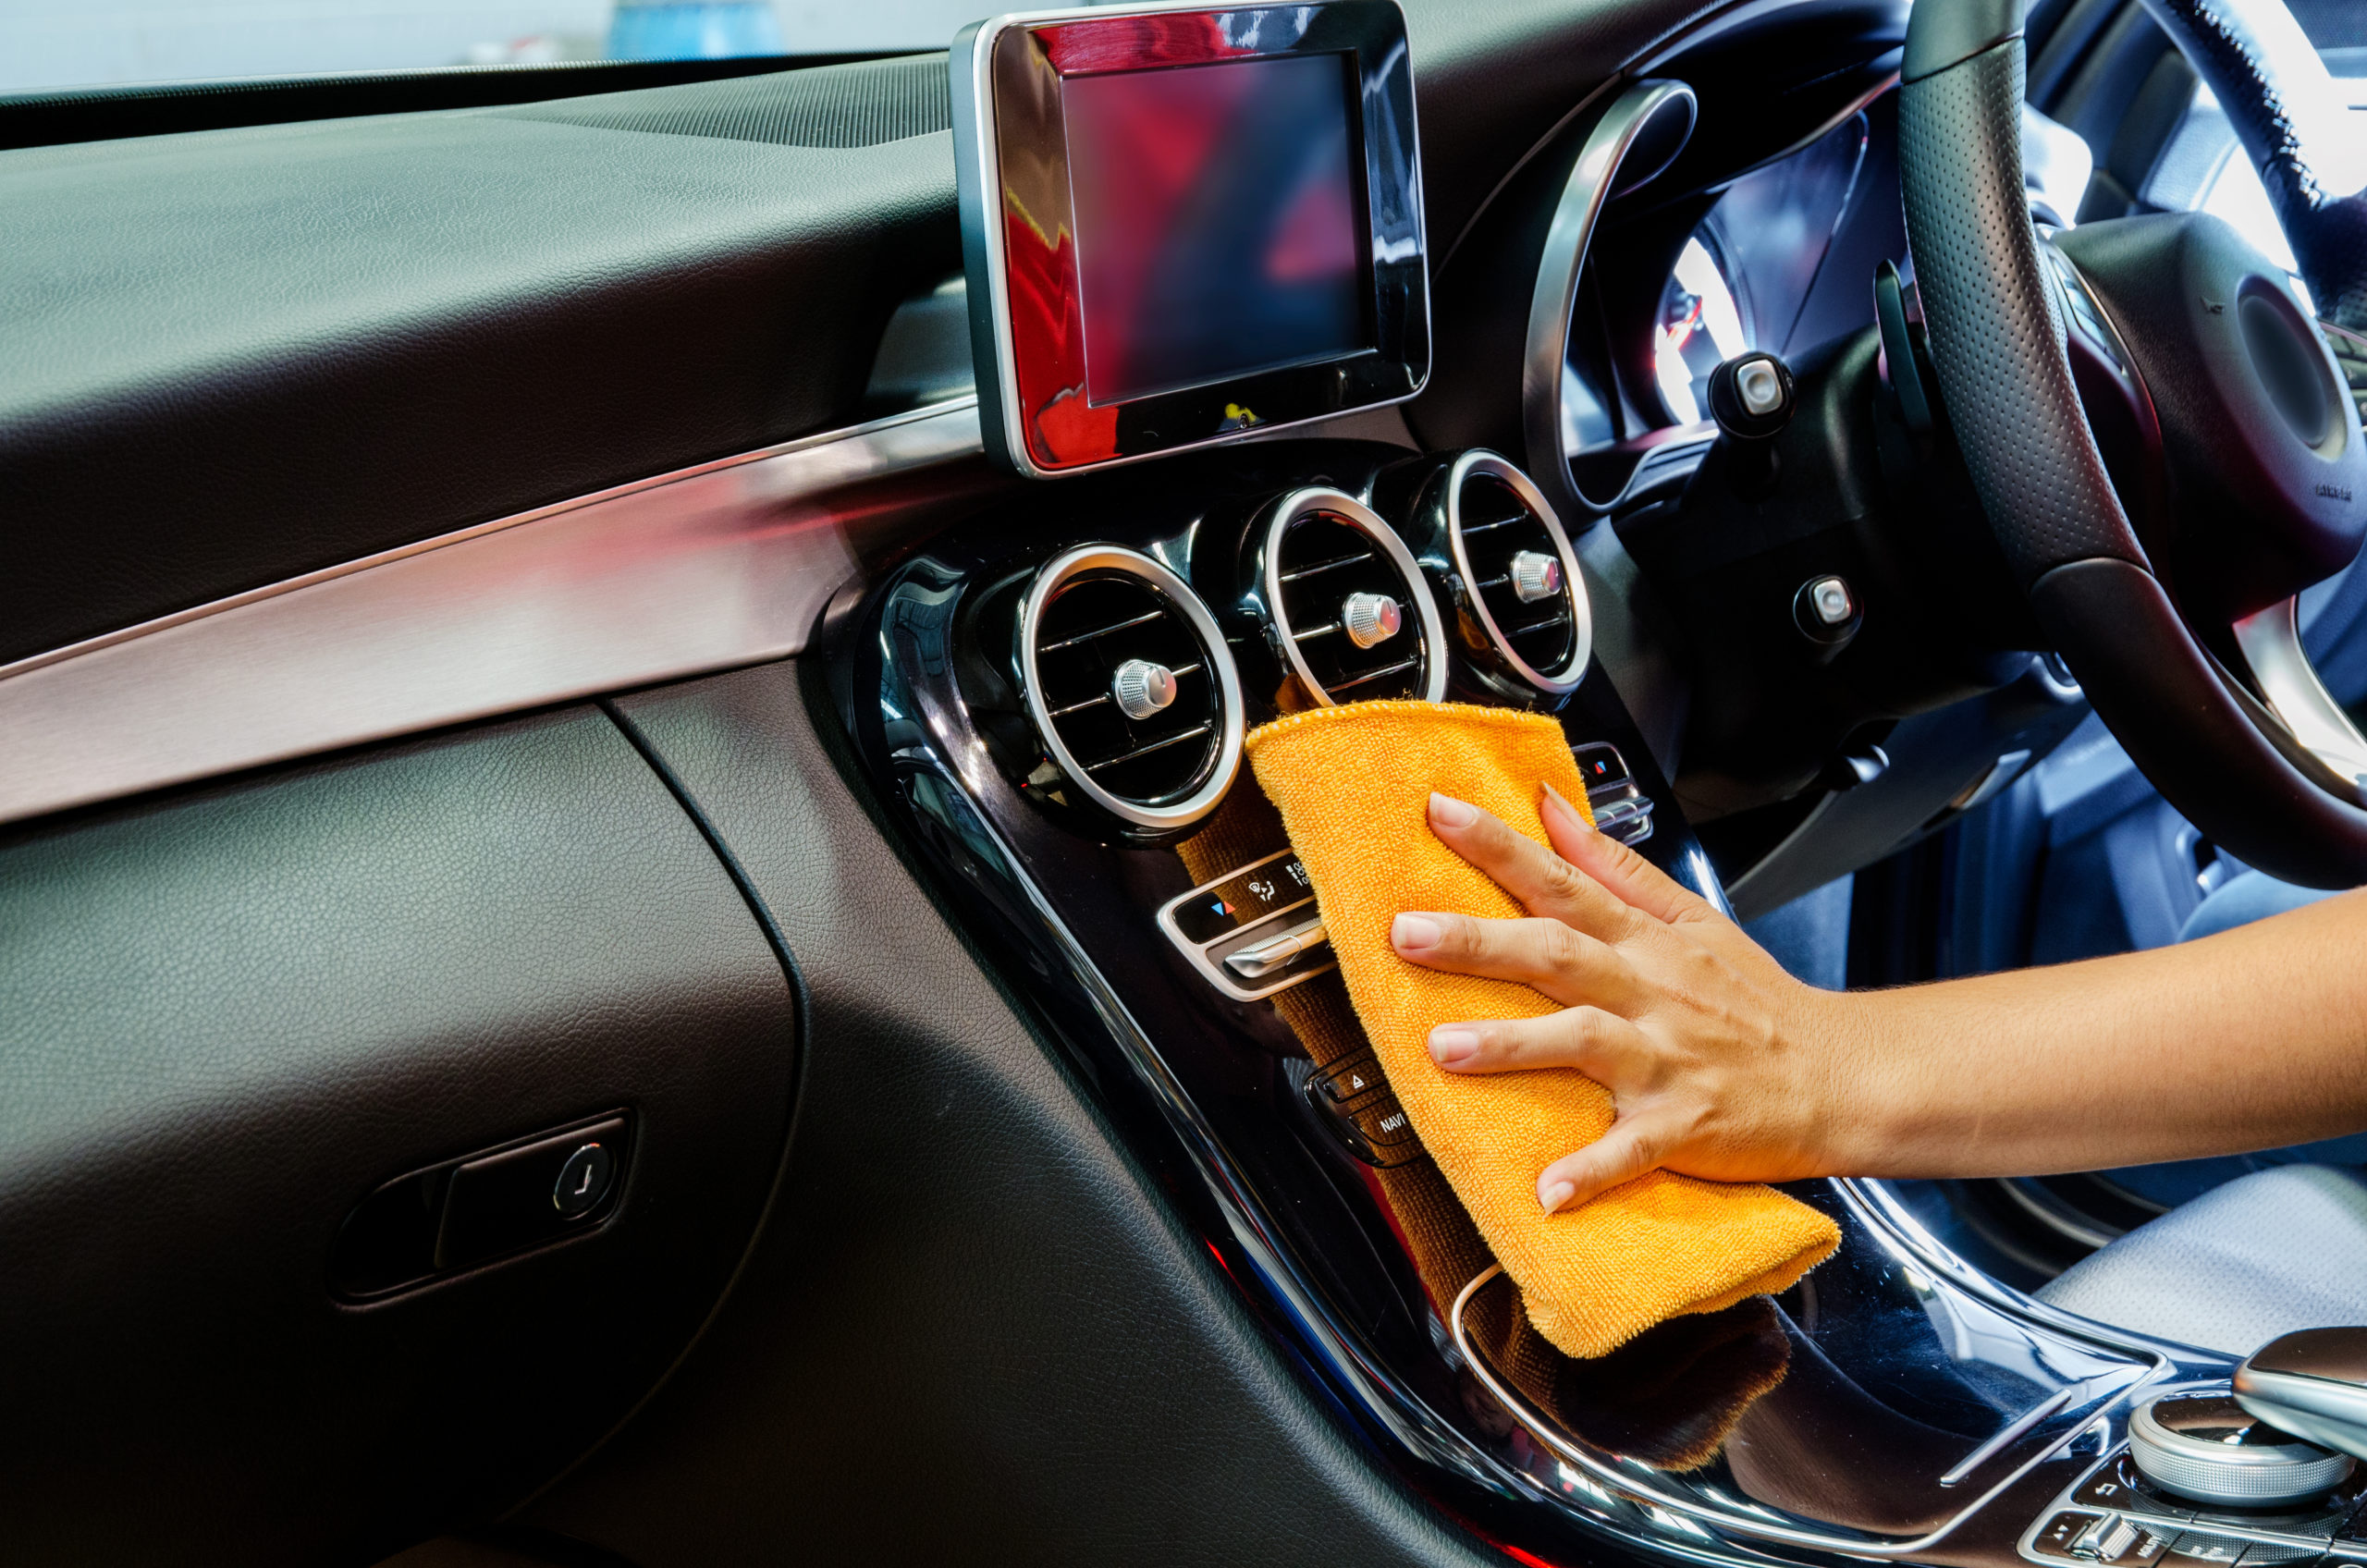 How to Disinfect a Car Without Damaging it - Carpages Blog